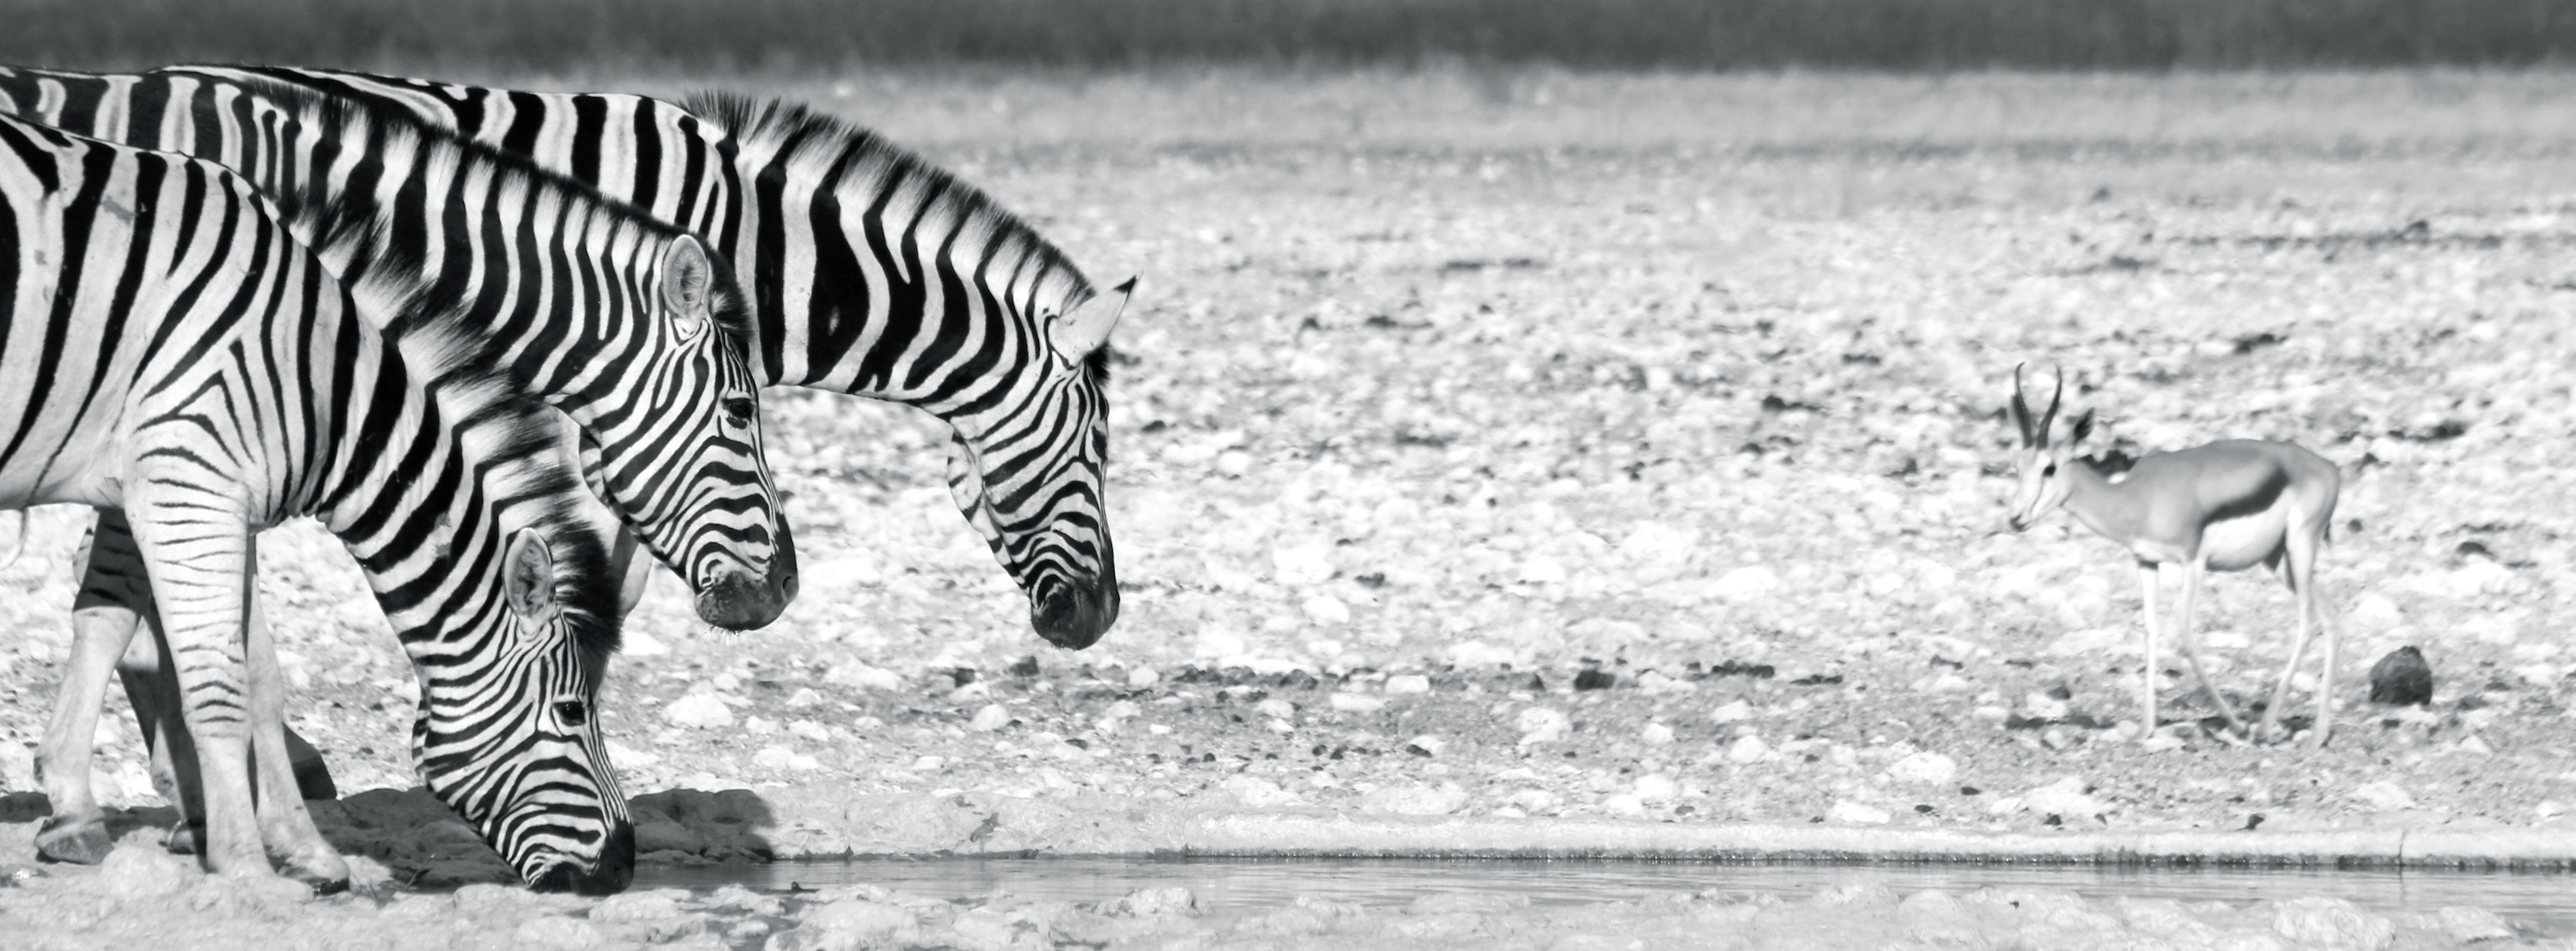 Black and white image of zebra at a waterhole.